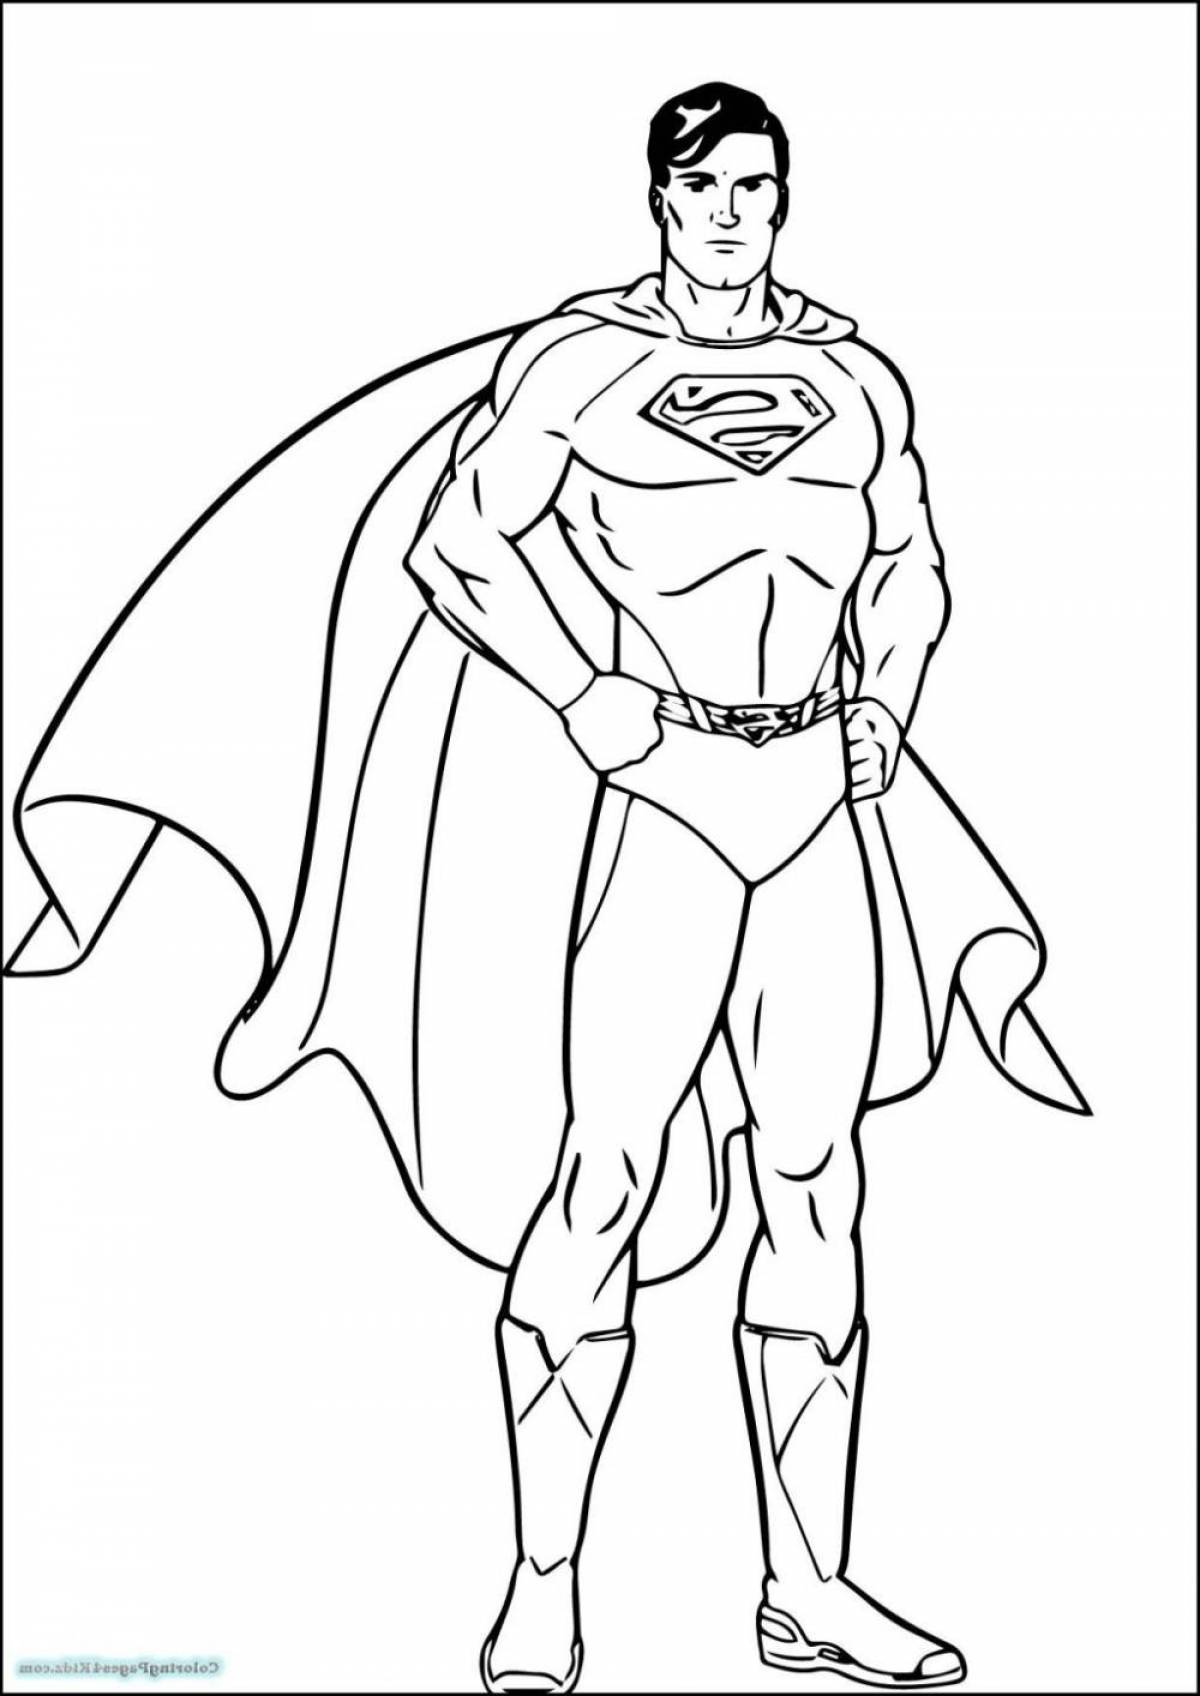 Glamorous superheroes coloring pages for kids